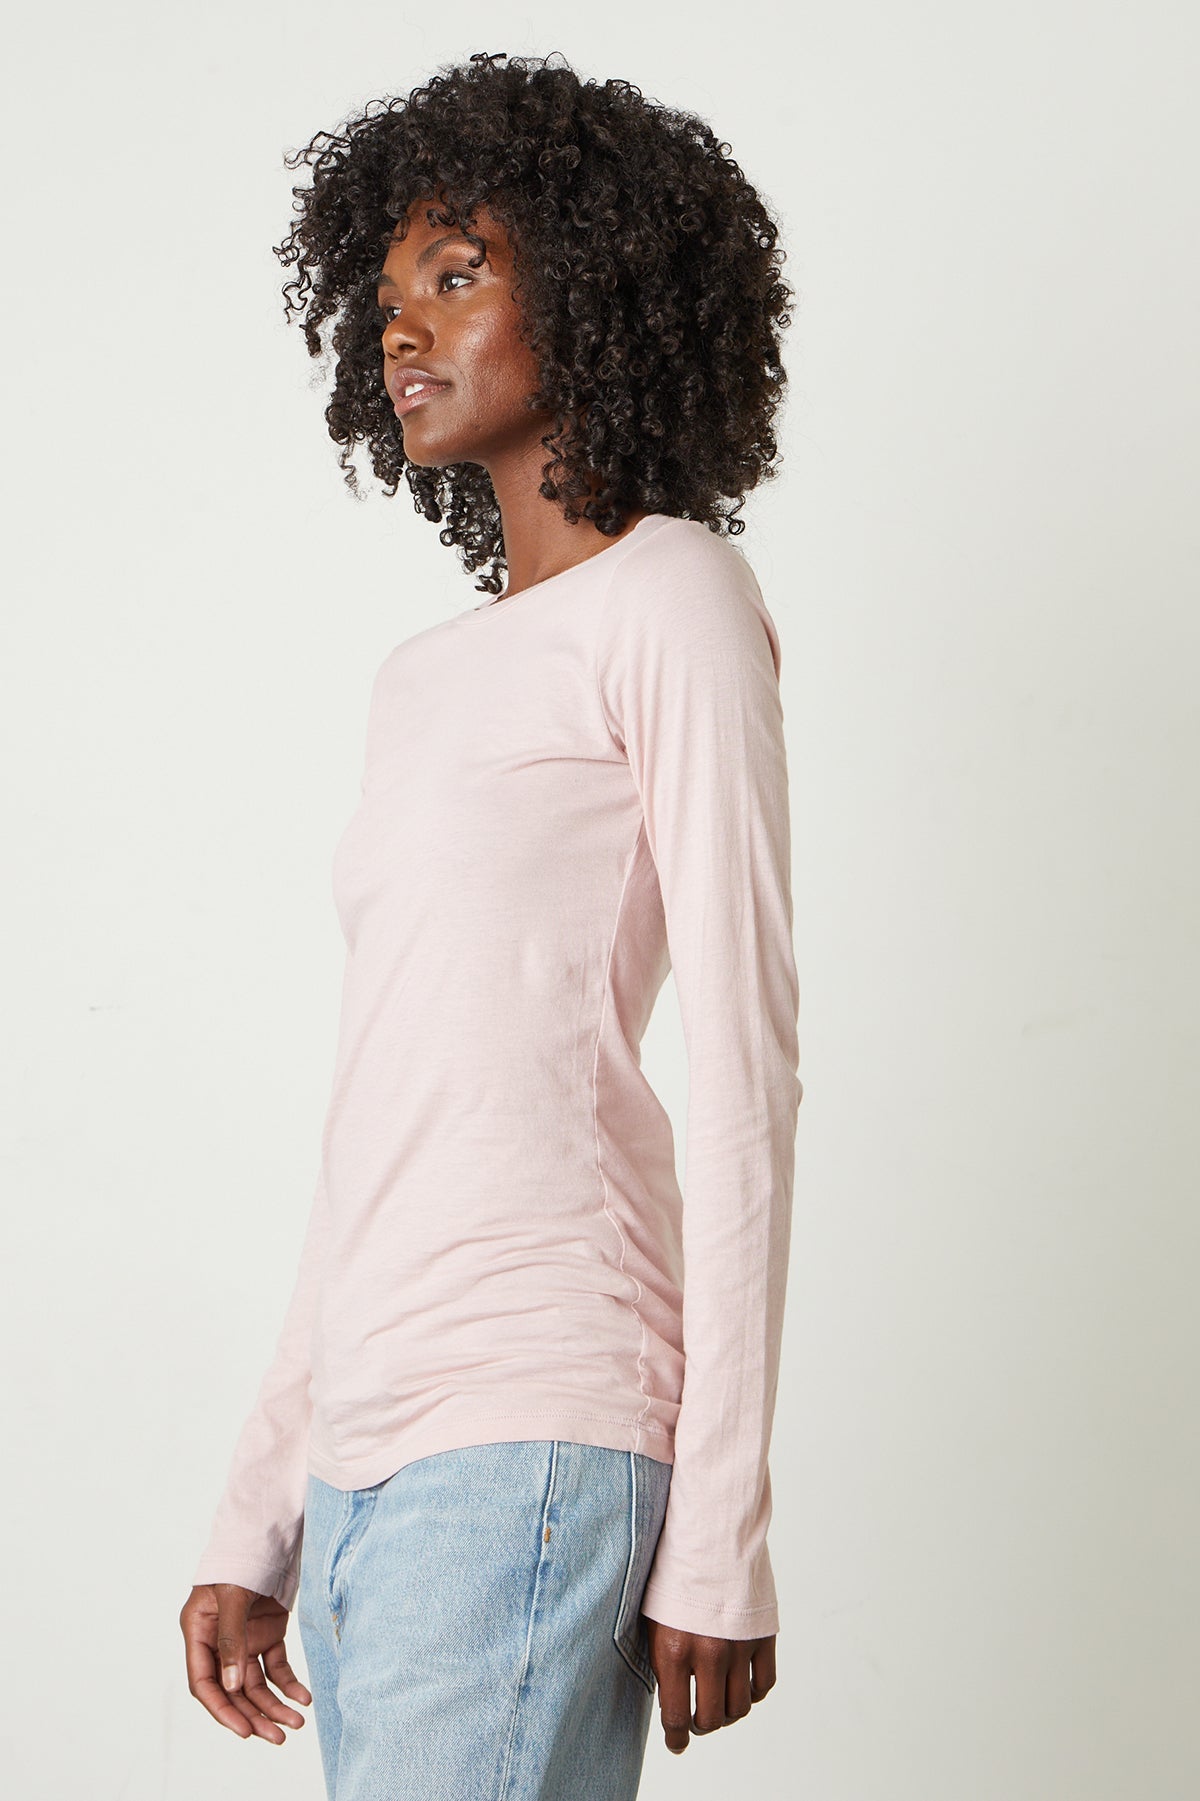 Zofina Gauzy Whisper Fitted Crew Neck Tee with long sleeves in light pink ribbon color and light blue denim front & side-26632448934081